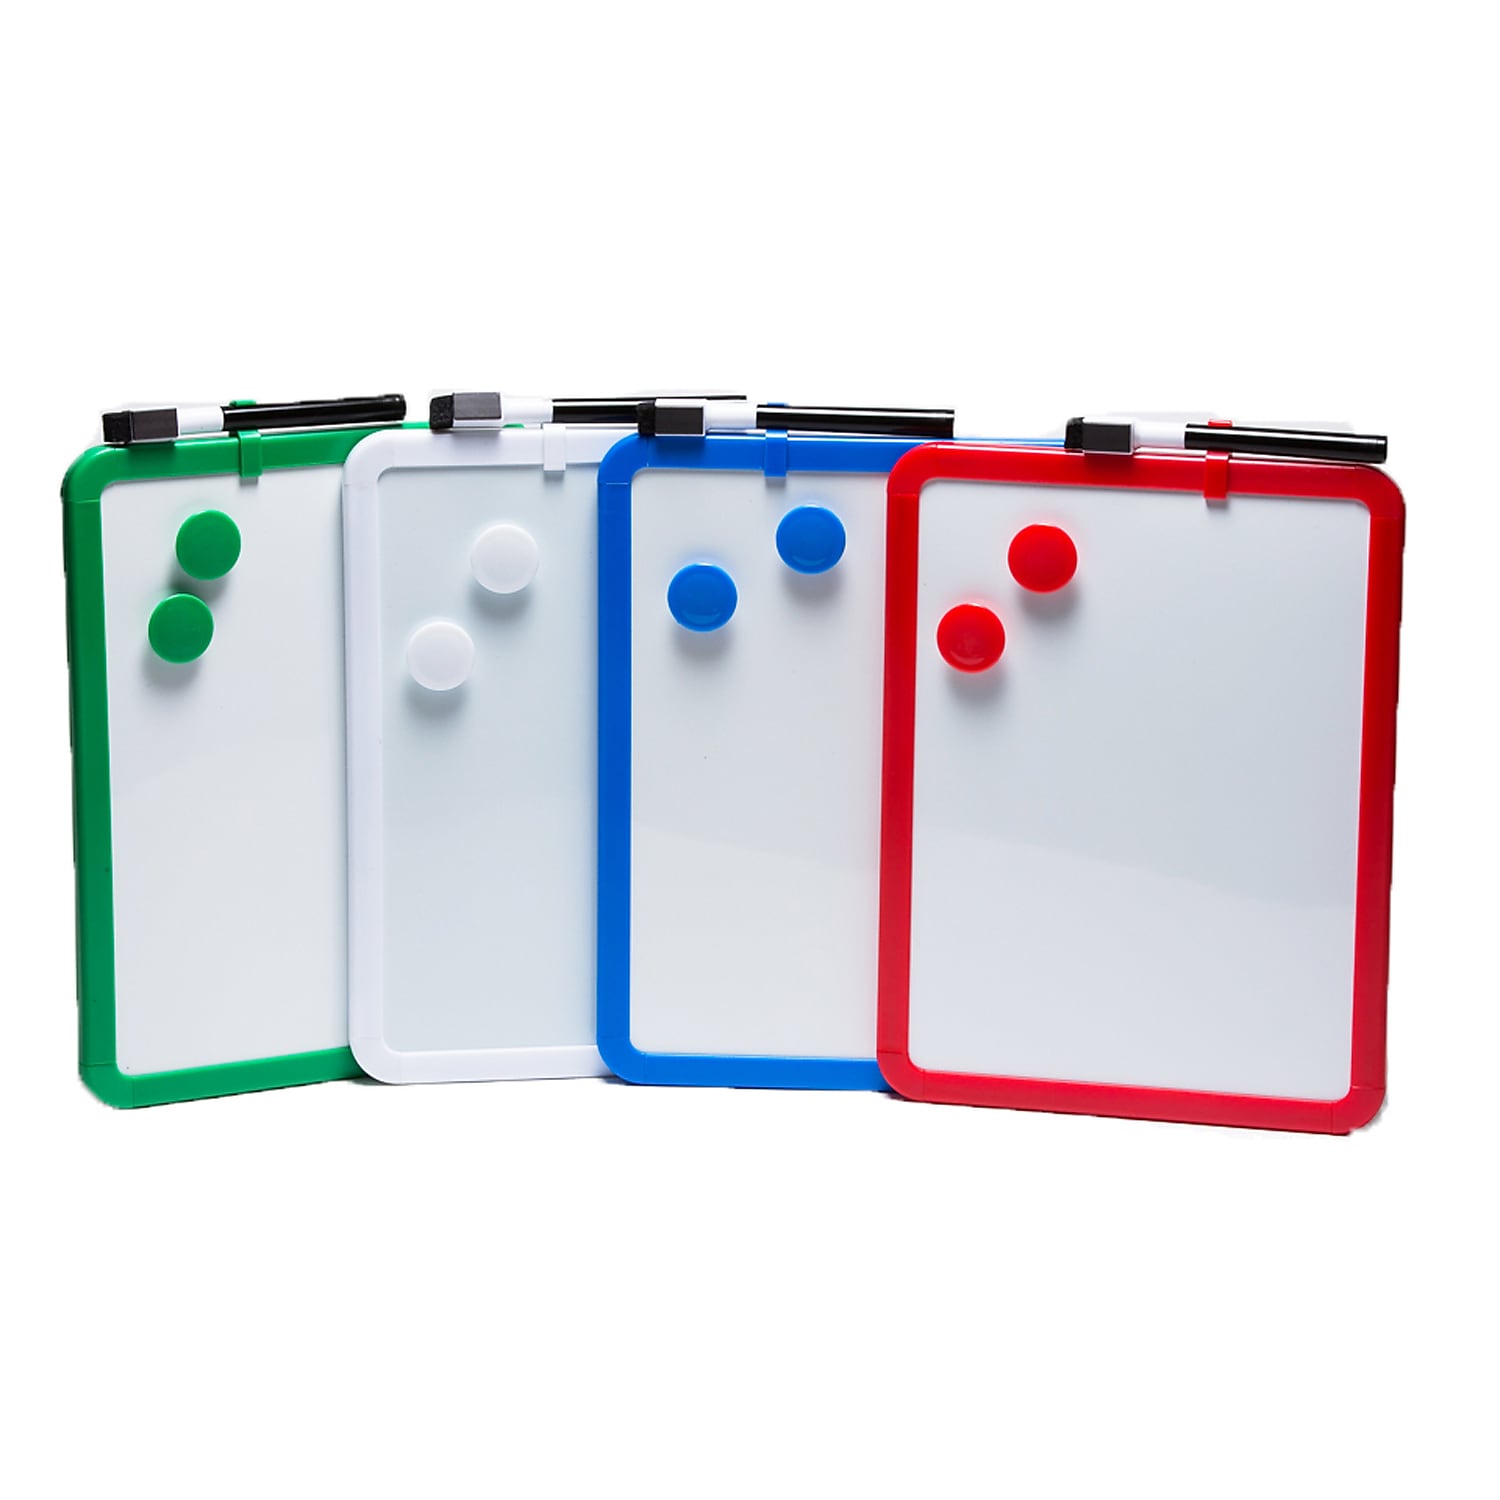 Charles Leonard CHL35204 Magnetic Dry Erase Boards Frames, Assorted Colors - 4 Box - image 2 of 2